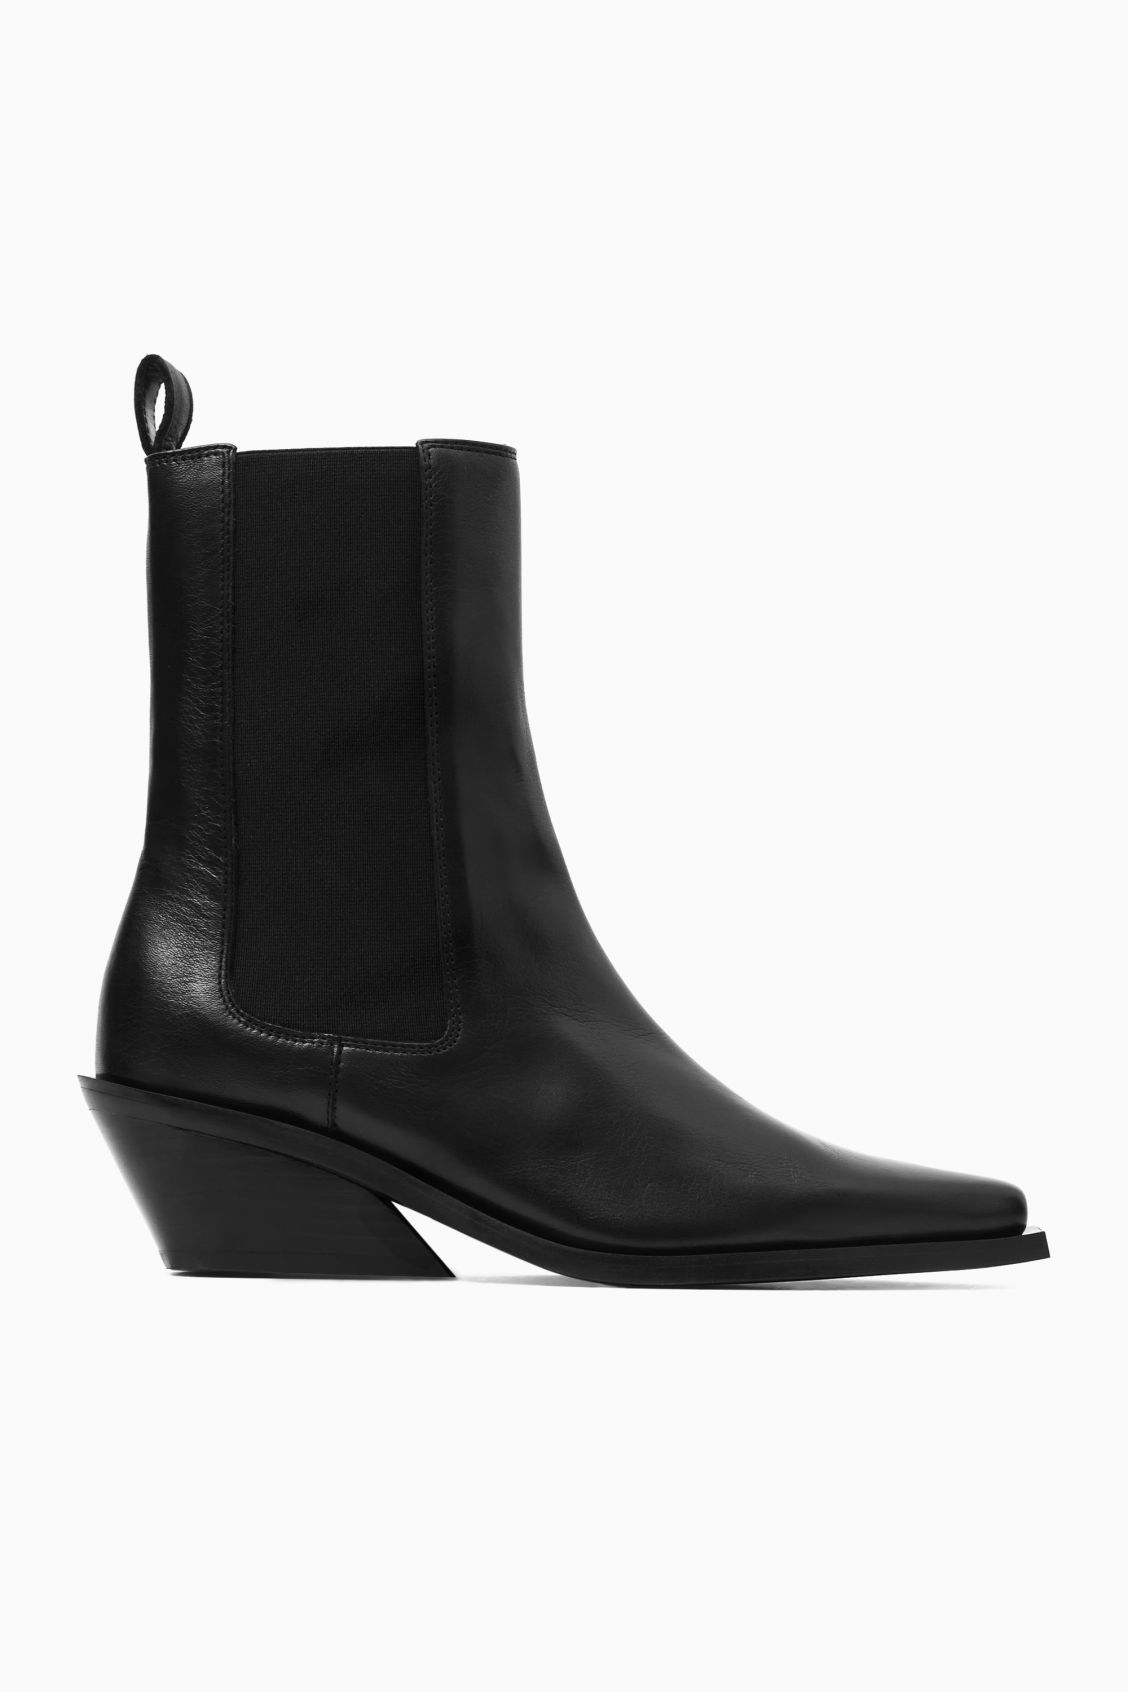 5 of the Best Black Ankle Boot Styles Fashion People Own | Who What Wear UK